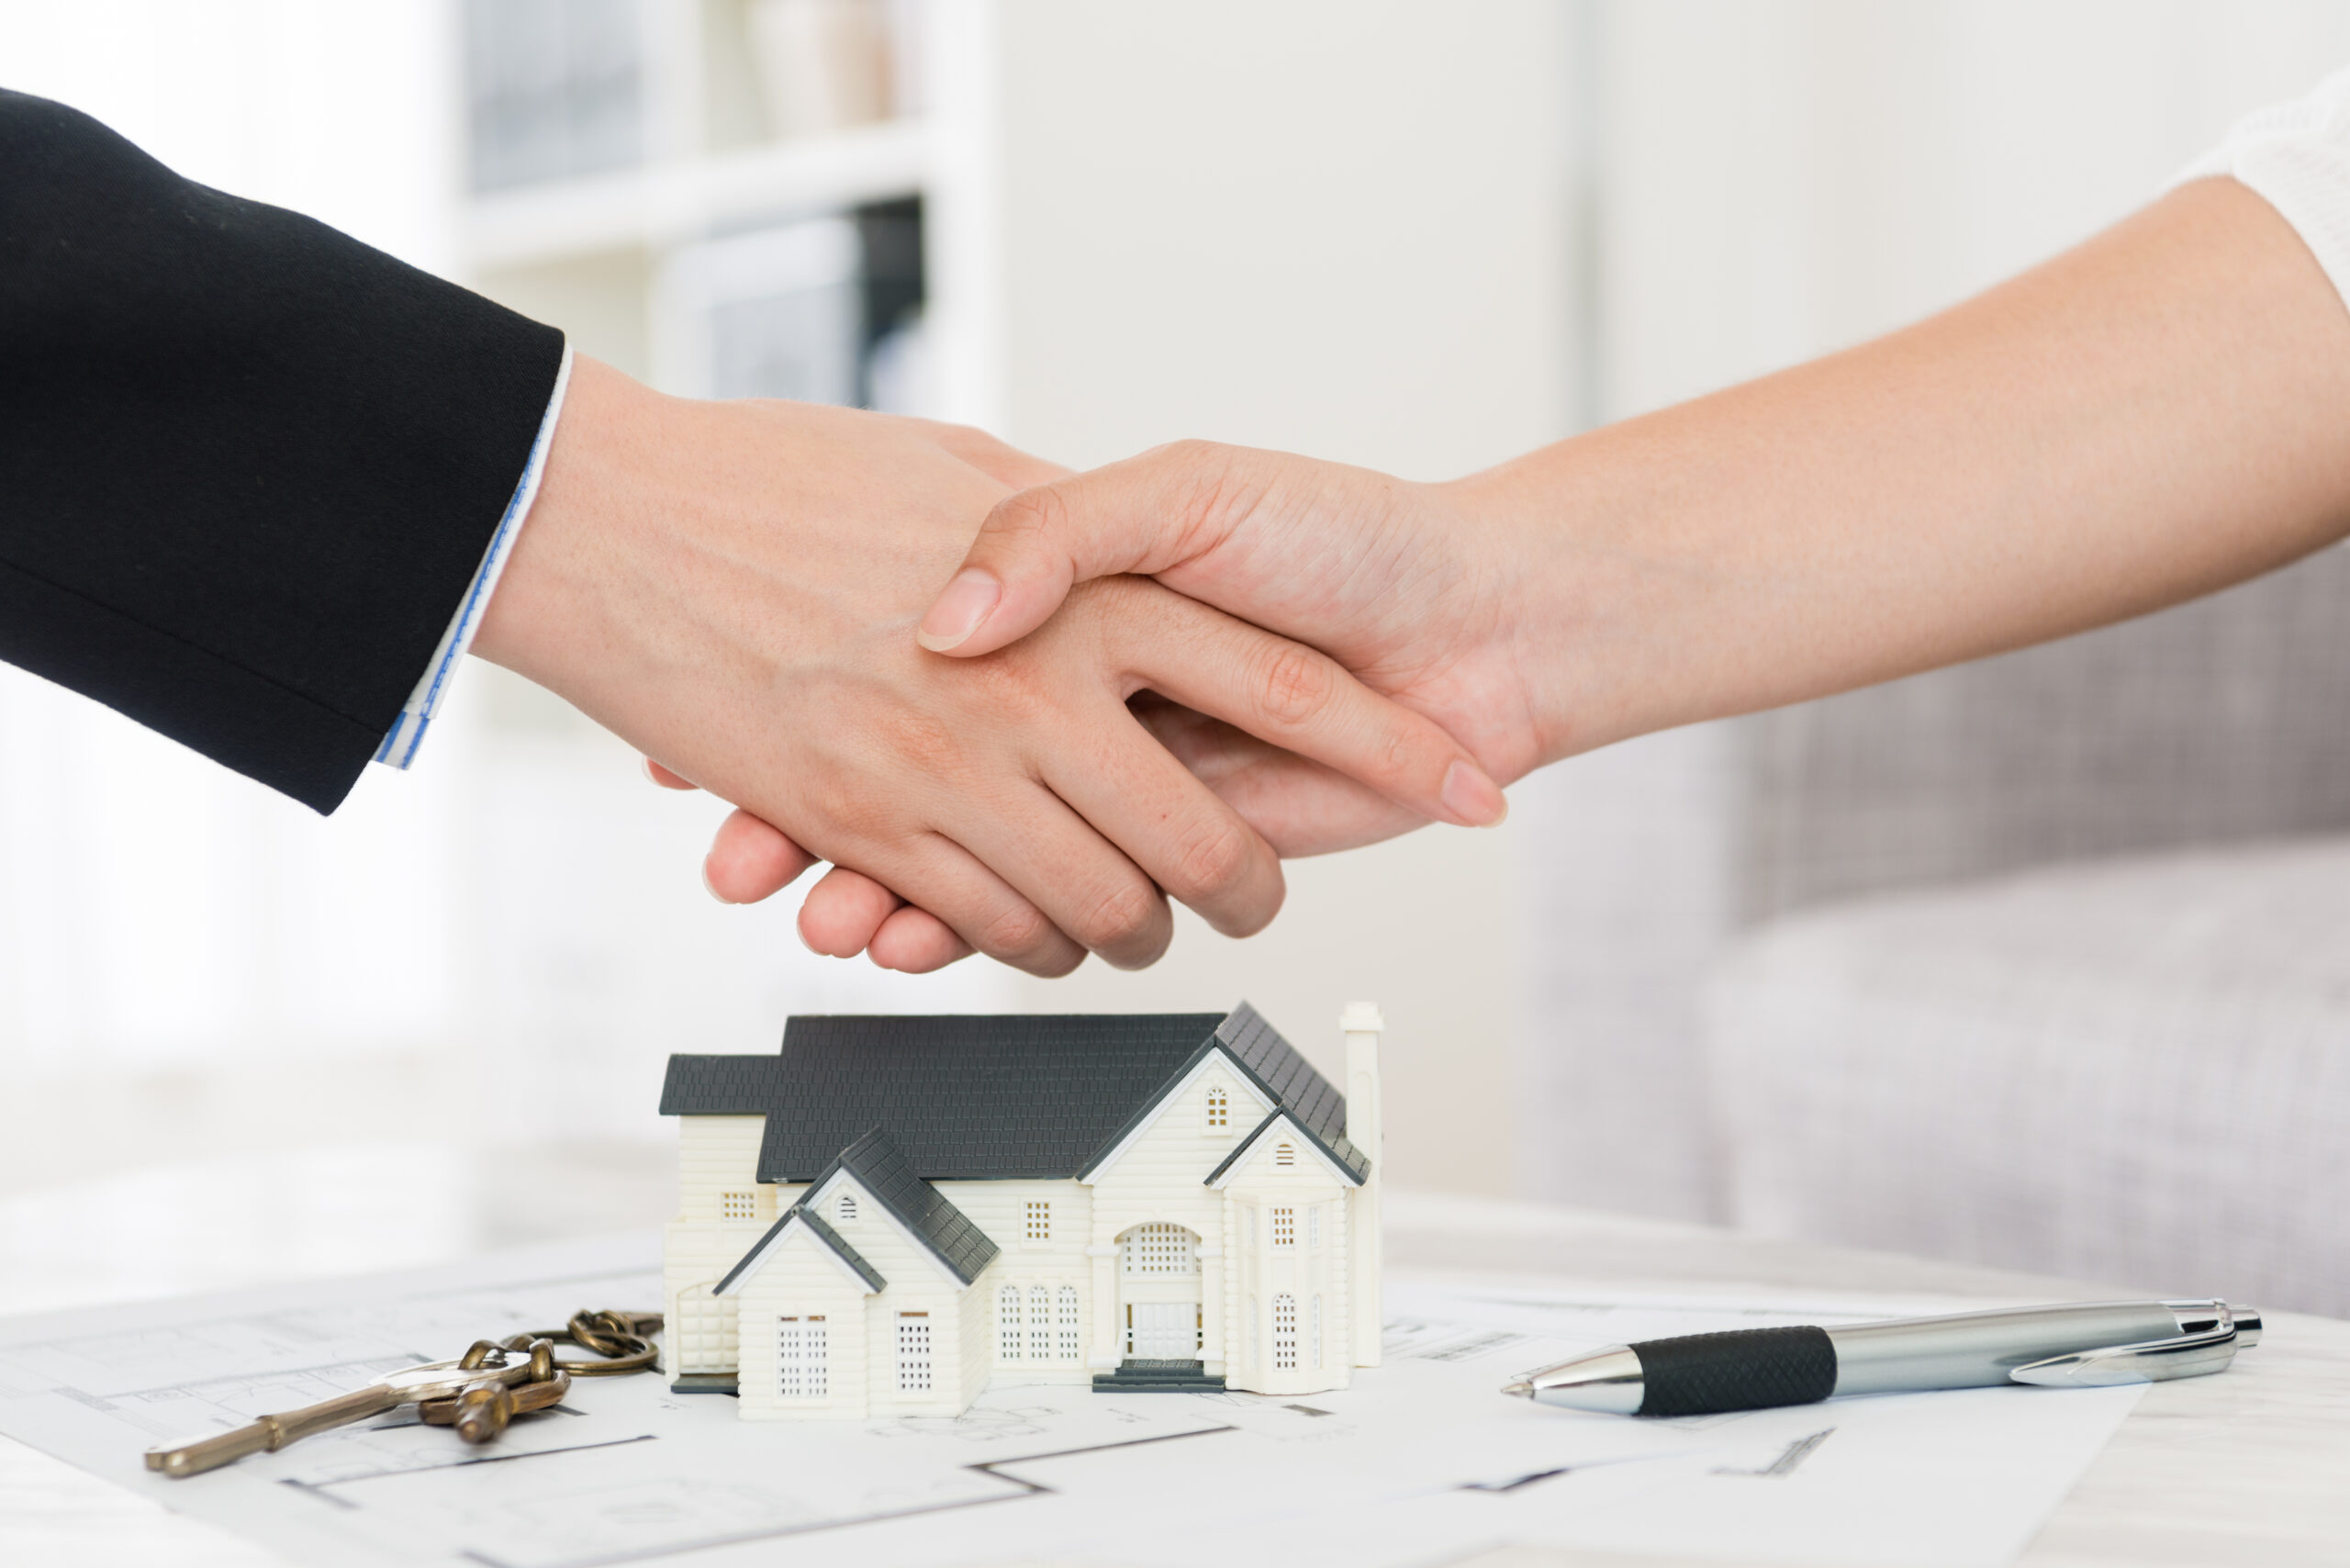 house agent successfully selling building scheme concept - business lady with investor buyer finished deal and handshake.